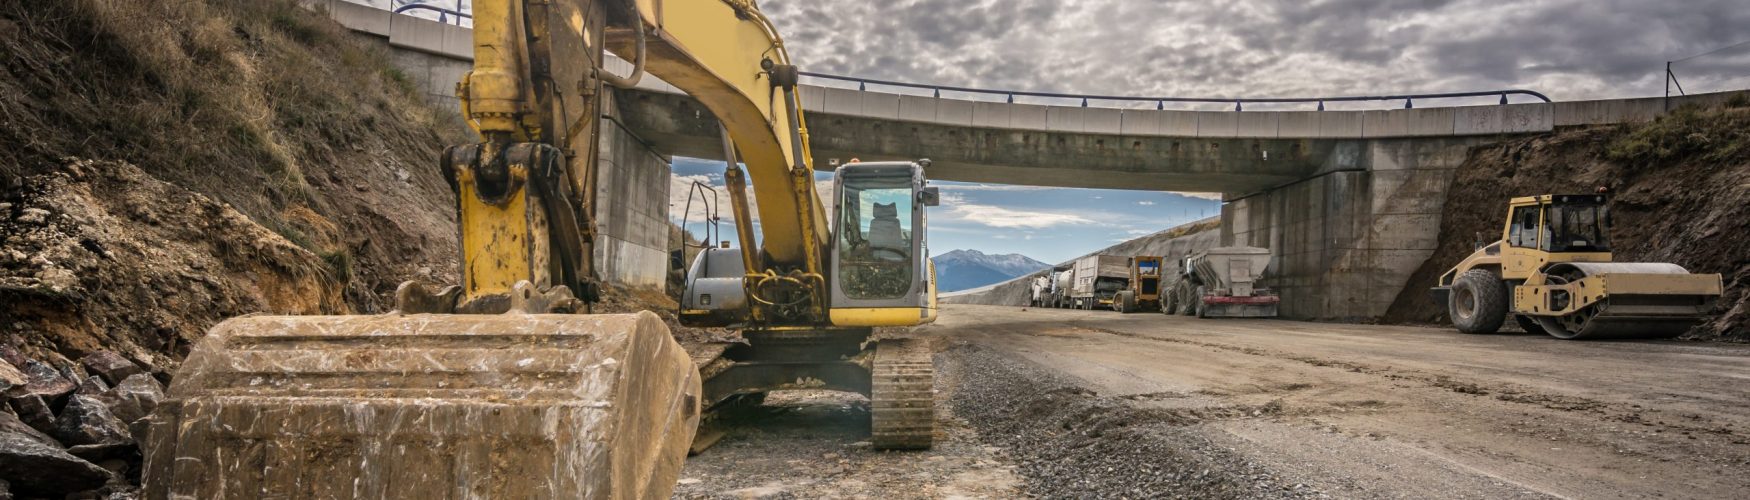 Used Heavy Equipment Broker | Construction, Farming, Highway, and Paving | Used Heavy Iron